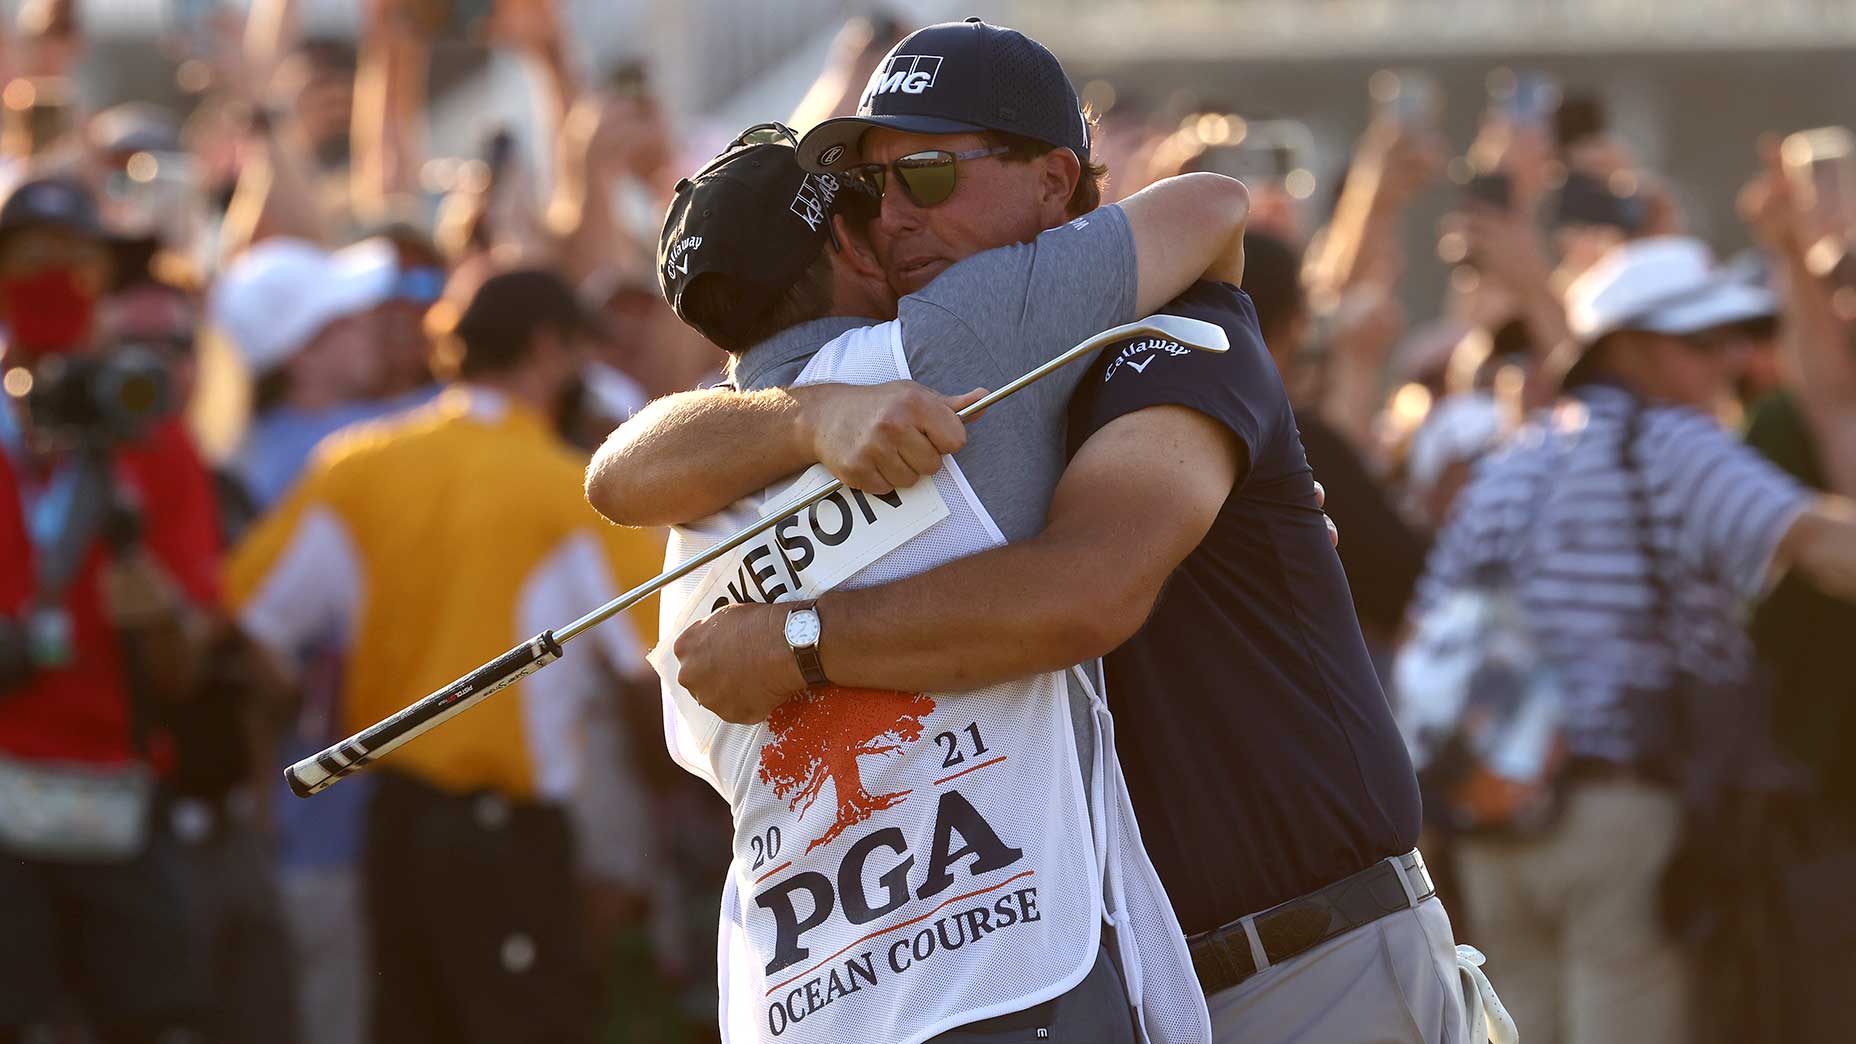 Phil Mickleson and his brother/caddie, Tim Mickelson, celebrate their 2021 PGA Championship victory.